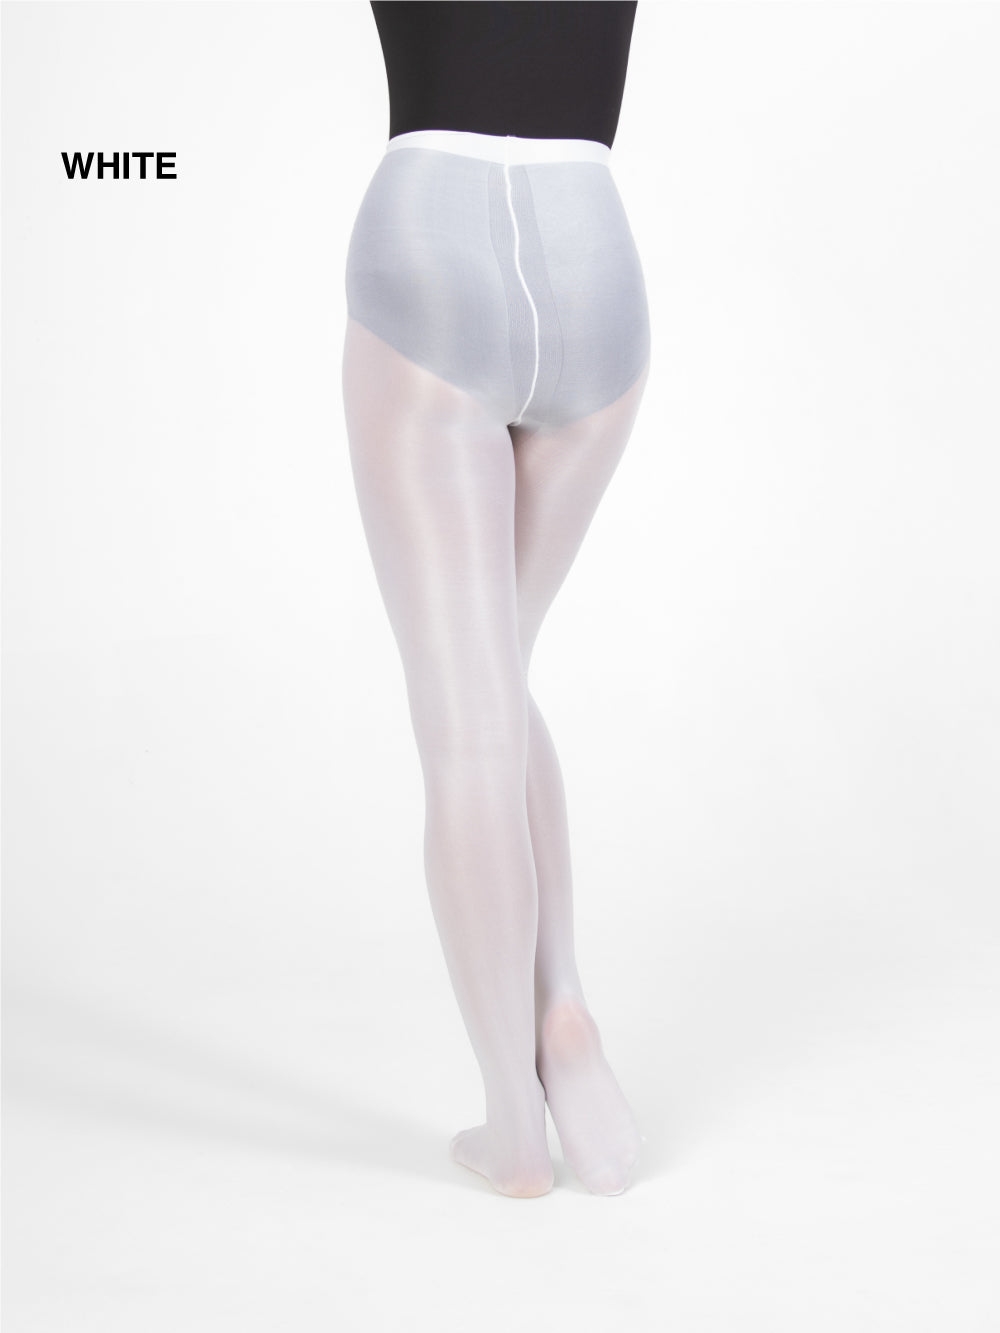 Womens Shimmer Tights - Footed Tights, Theatricals T6200